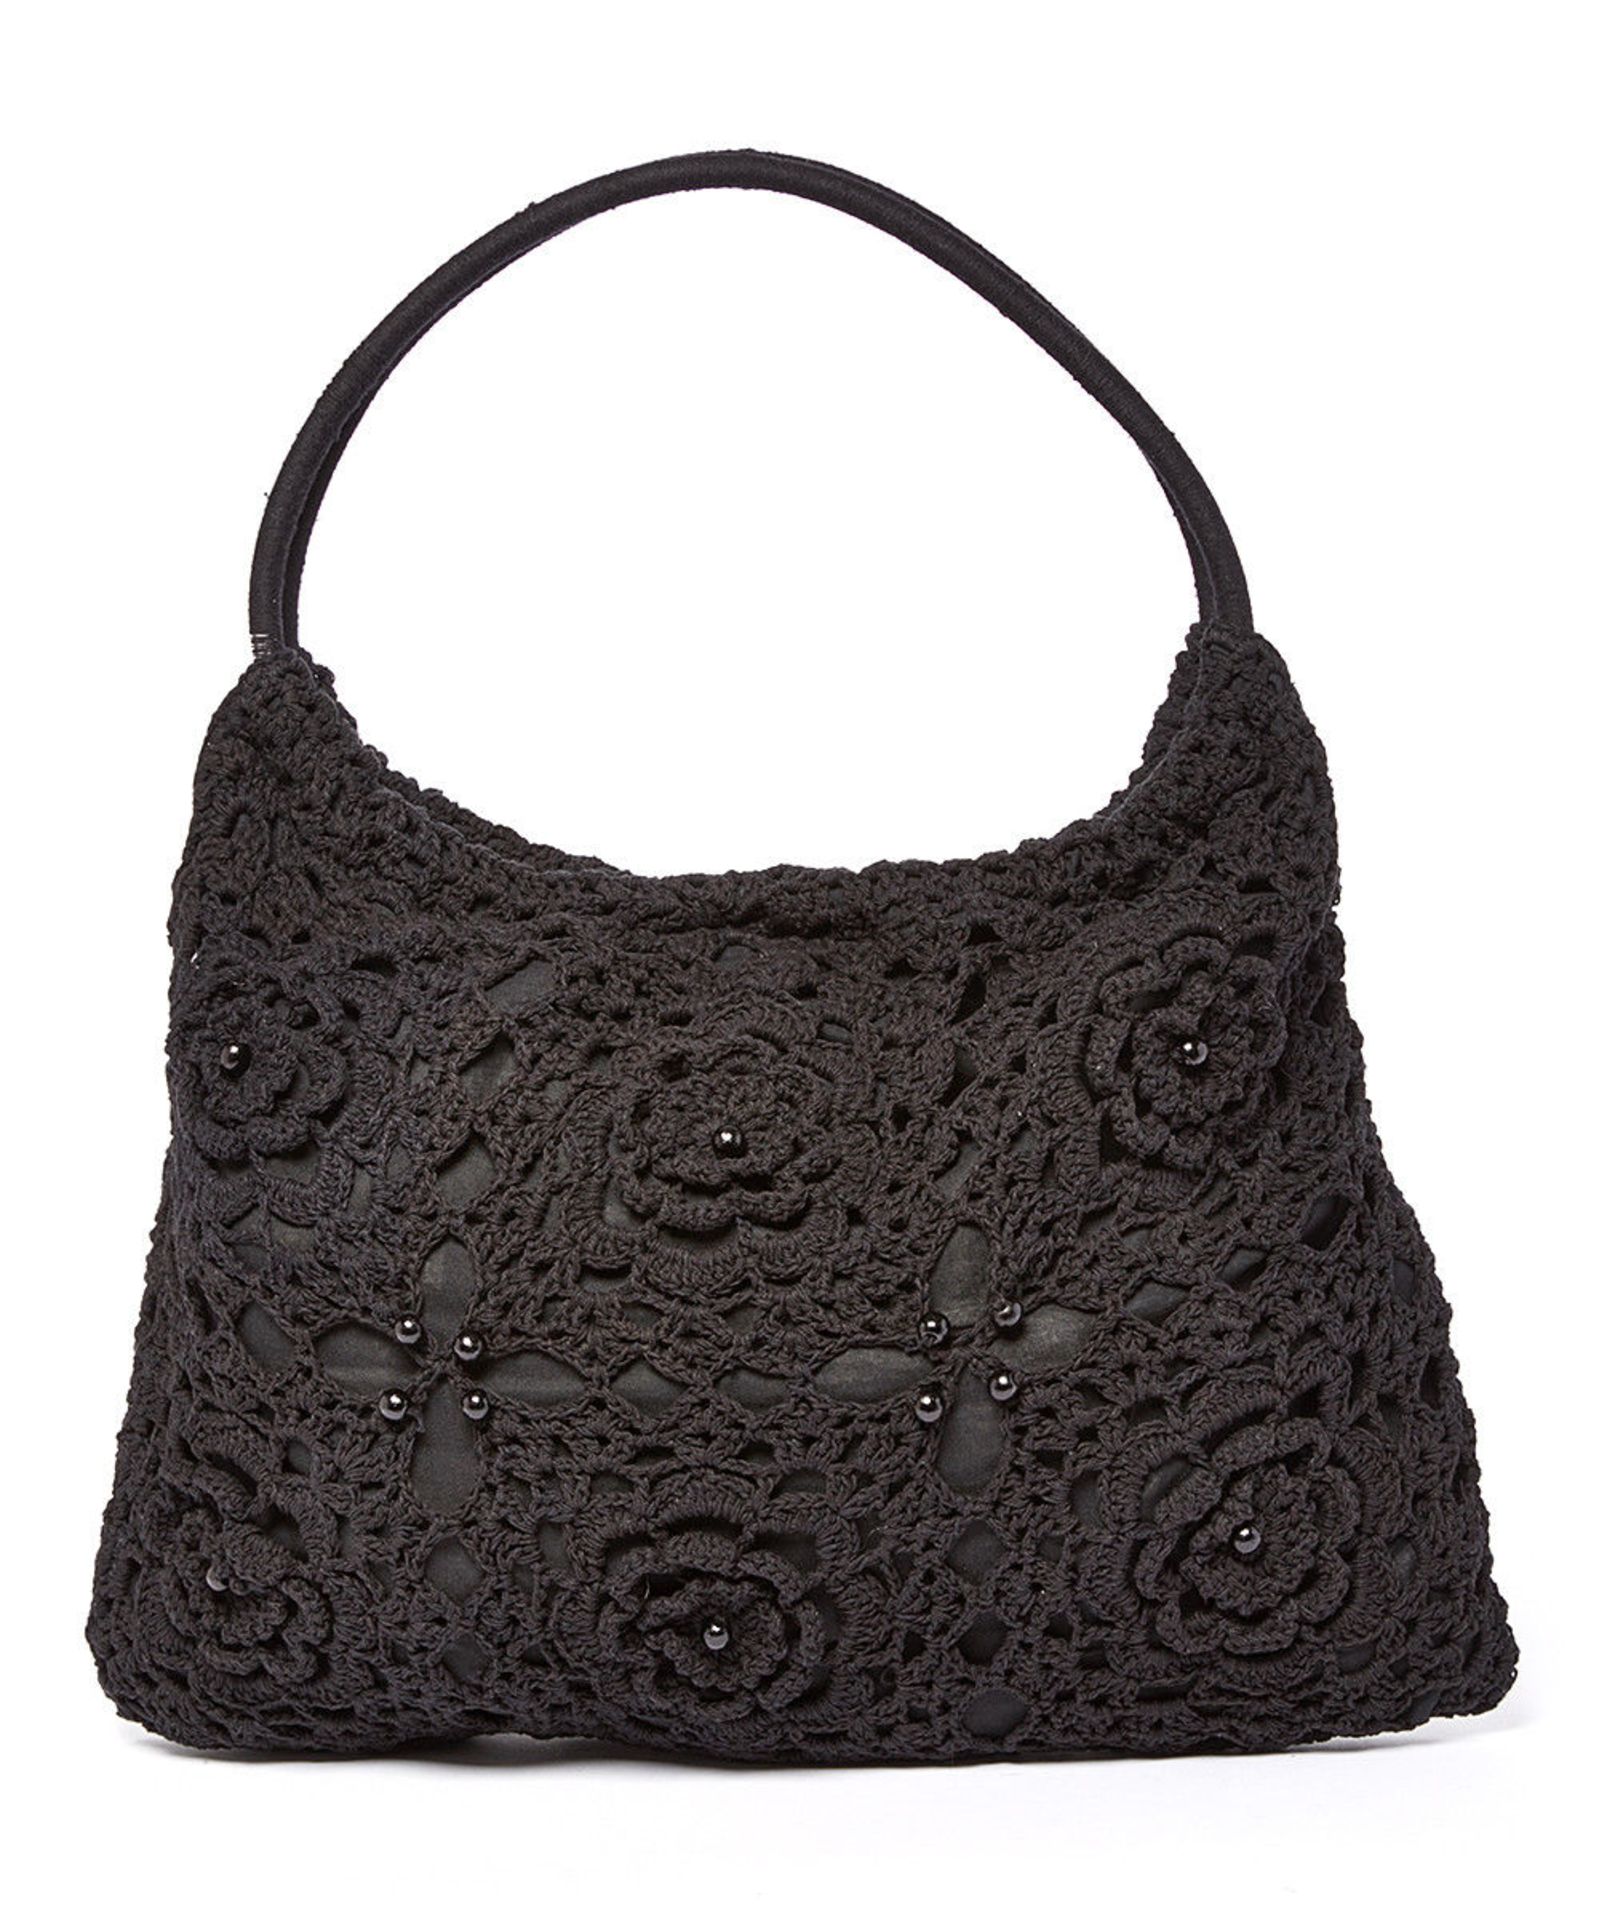 Black Floral Rosette Tote (New With Tags) [Ref: 49089323-Tub 9-Mi]